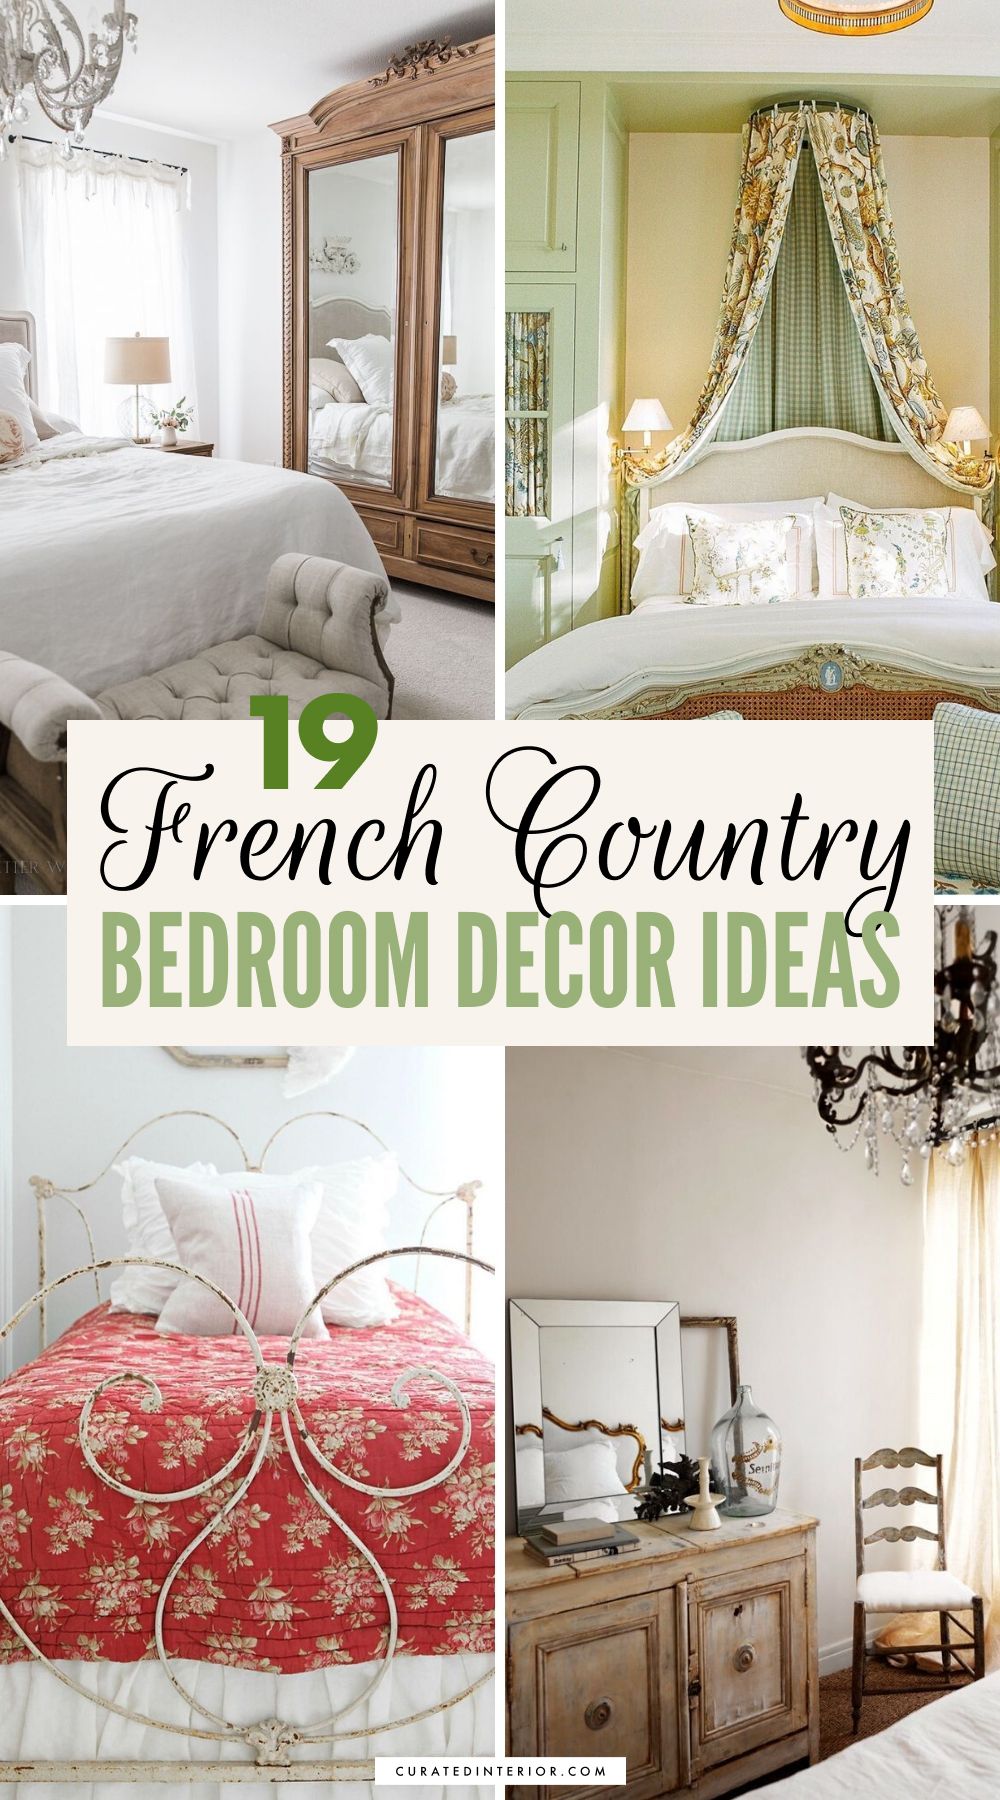 19 French Country Bedroom Decor Ideas